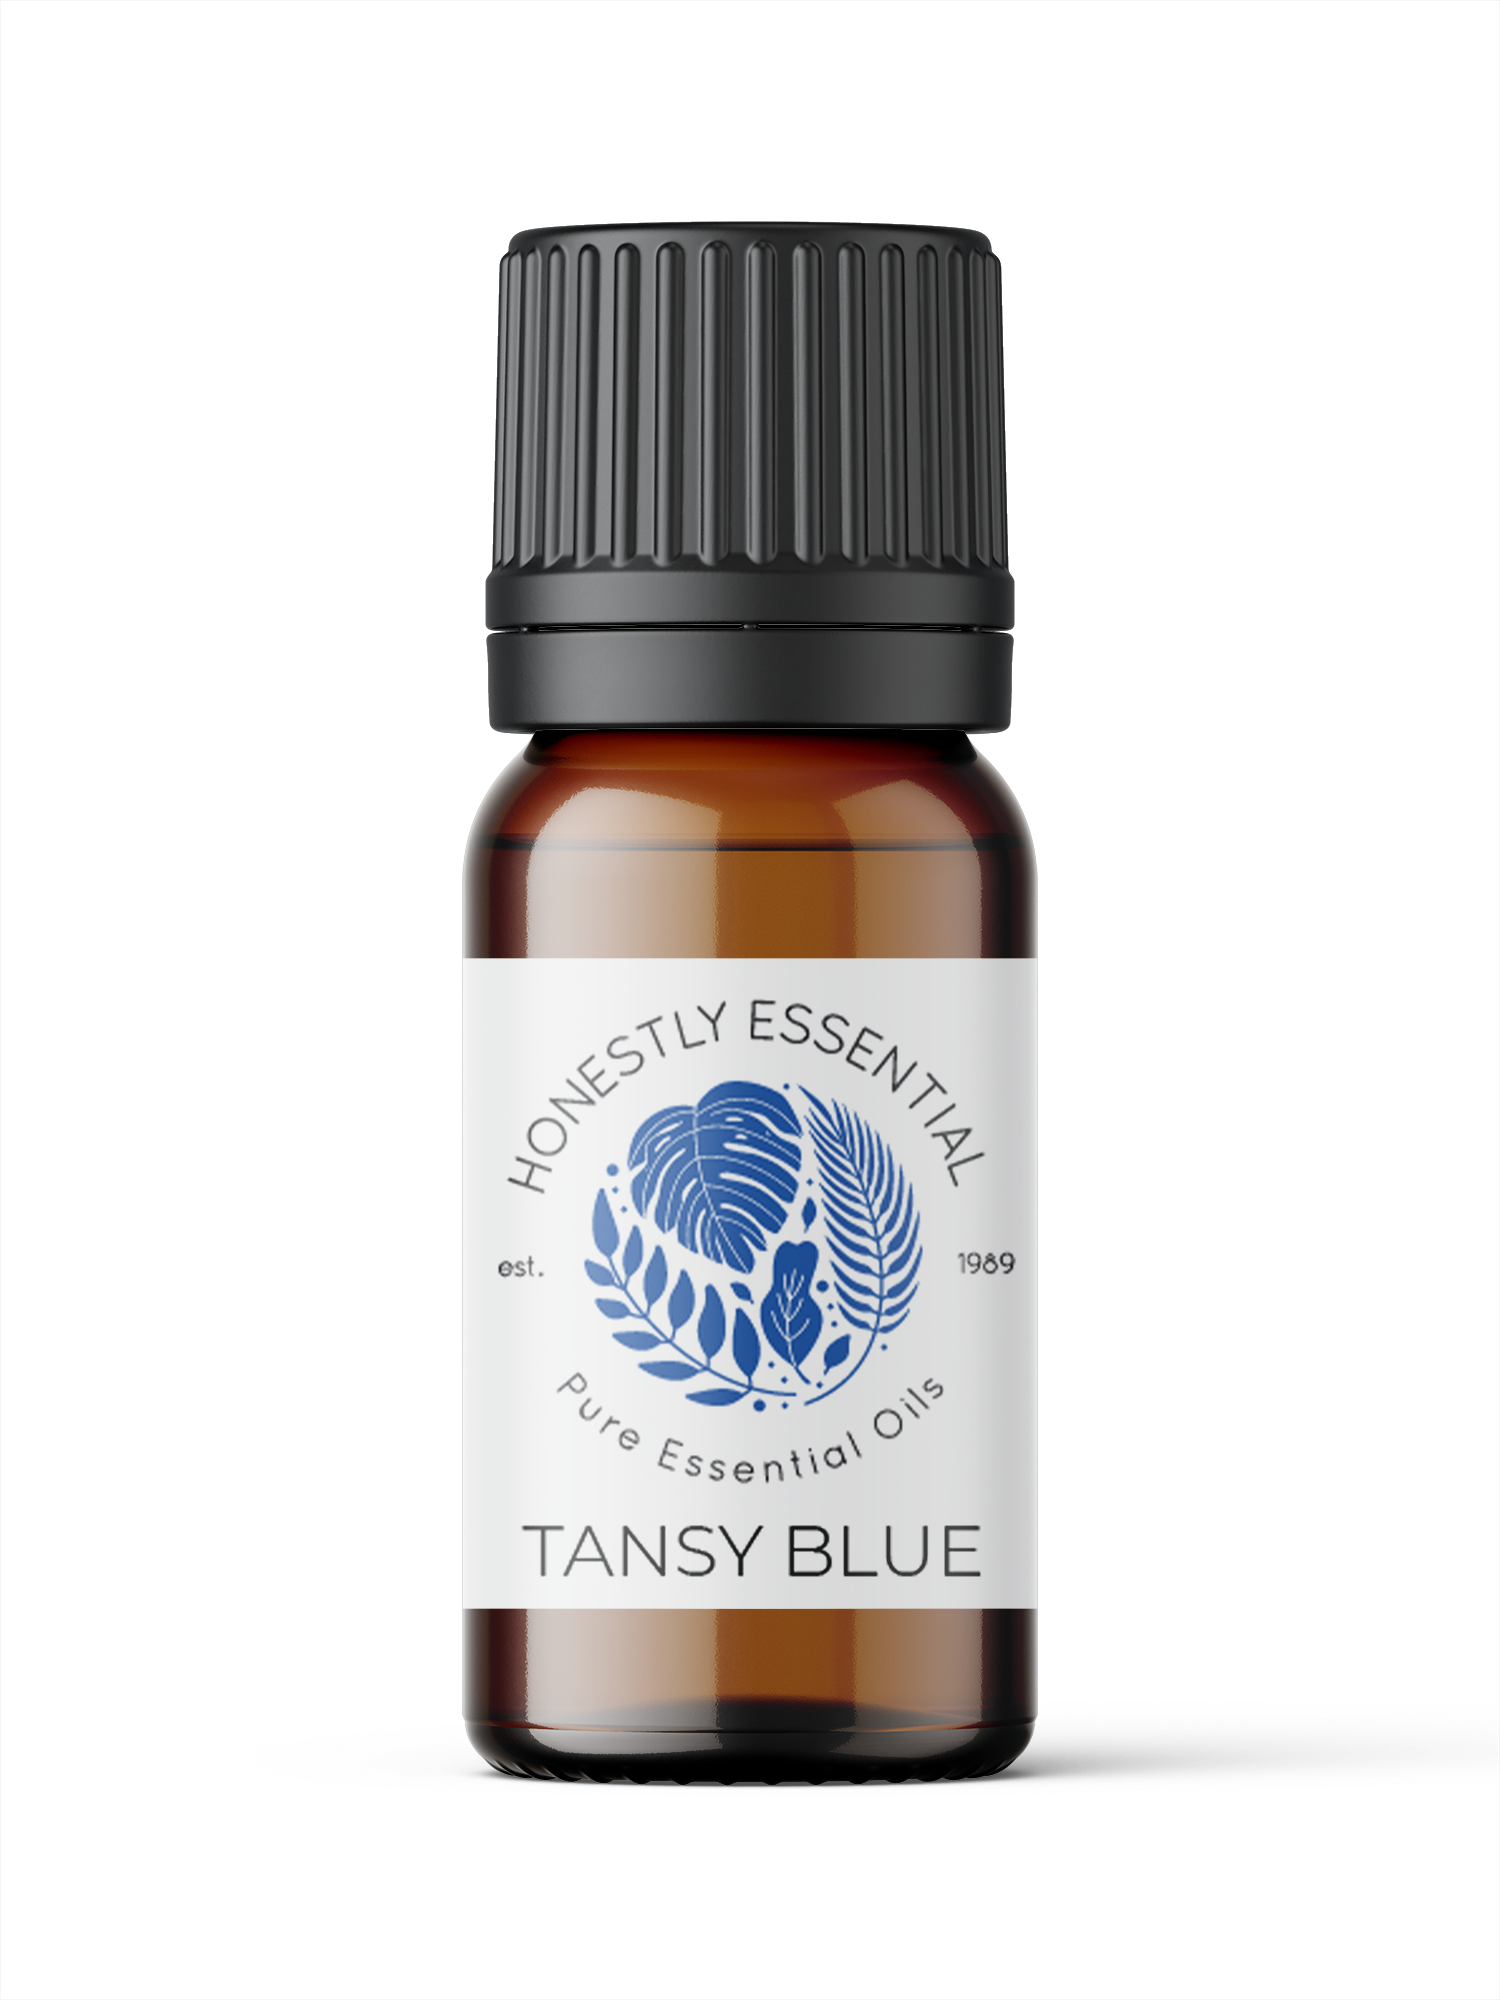 Tansy Blue Essential Oil - Essential Oils | Honestly Essential Oils bruising, immunity, pain, pain reliever, sores, wounds